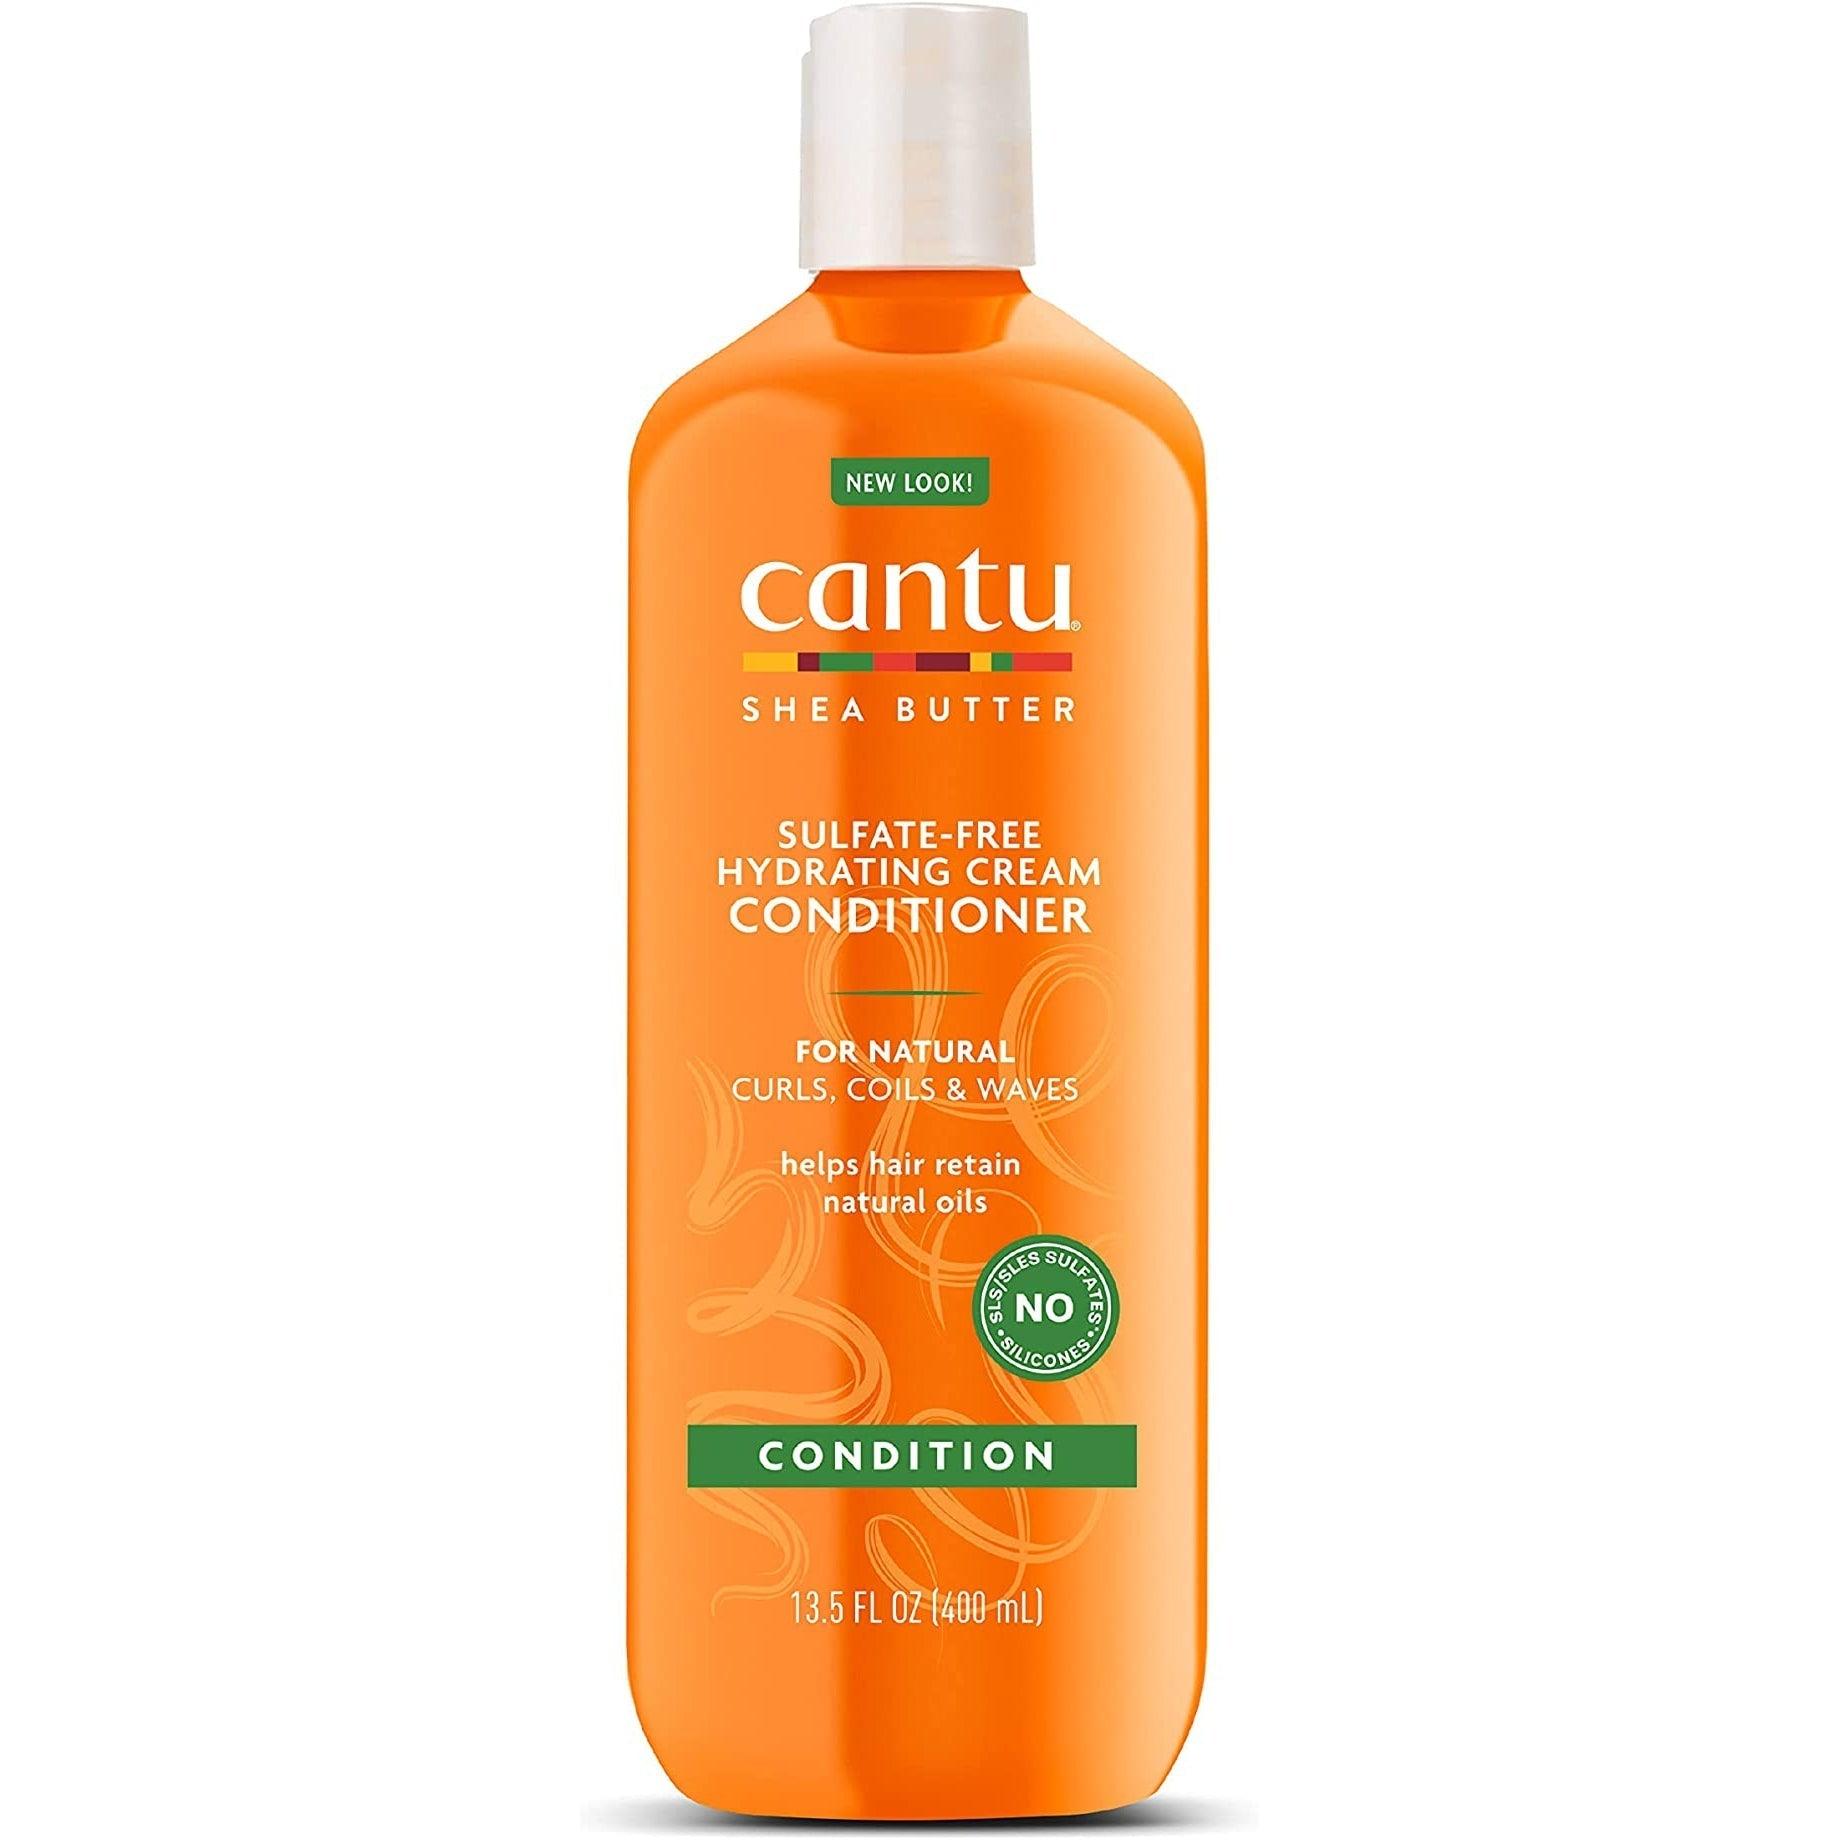 Cantu Shea Butter For Natural Hair Hydrating Cream Conditioner, 13.5oz (400ml) - African Beauty Online